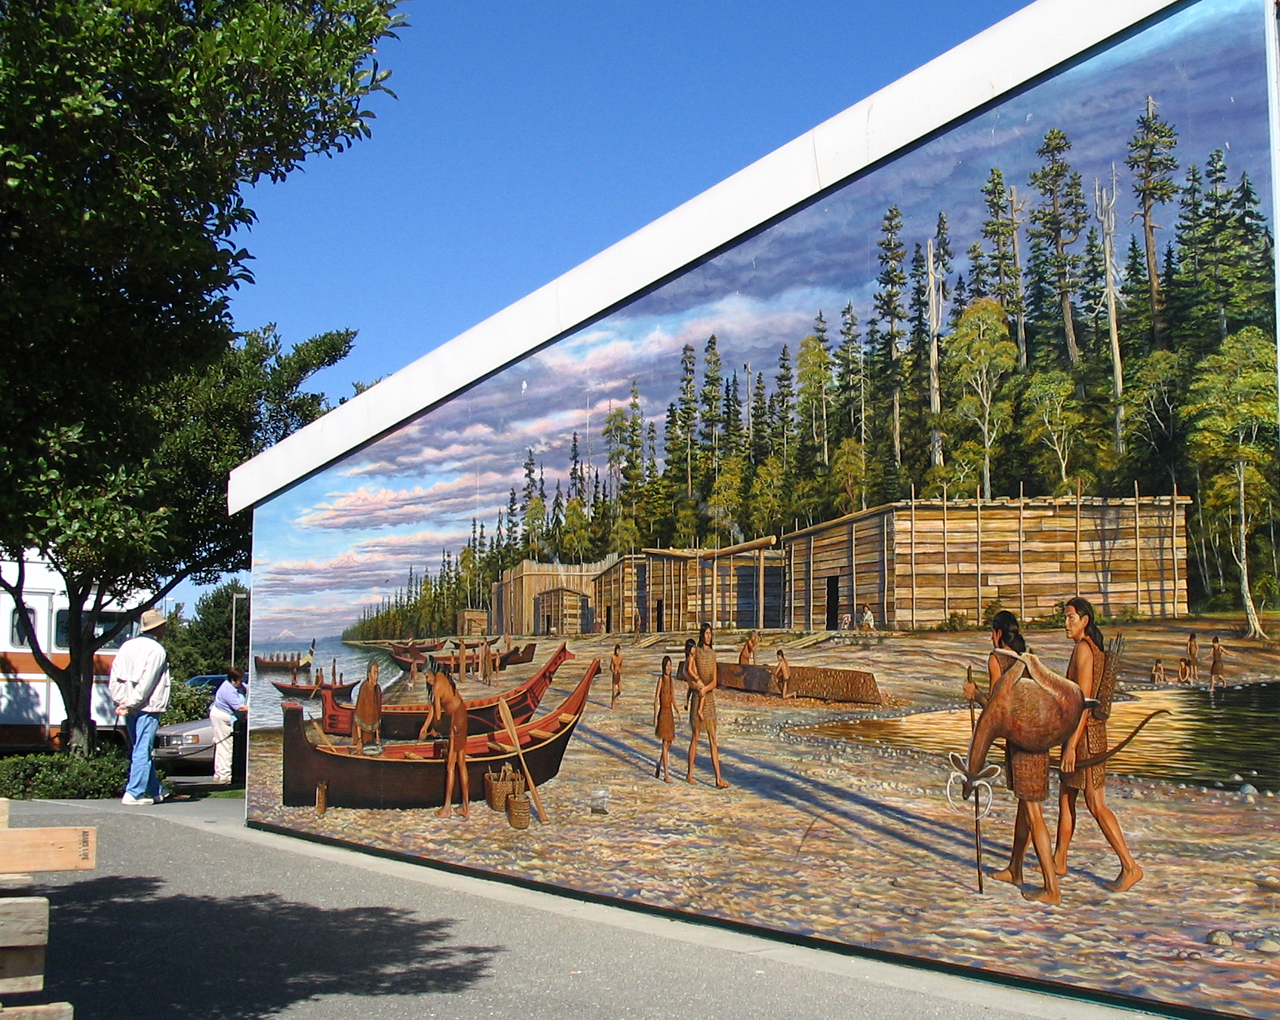 Mural at Port Angeles depicting an early village of the Lower ElwhaTribe